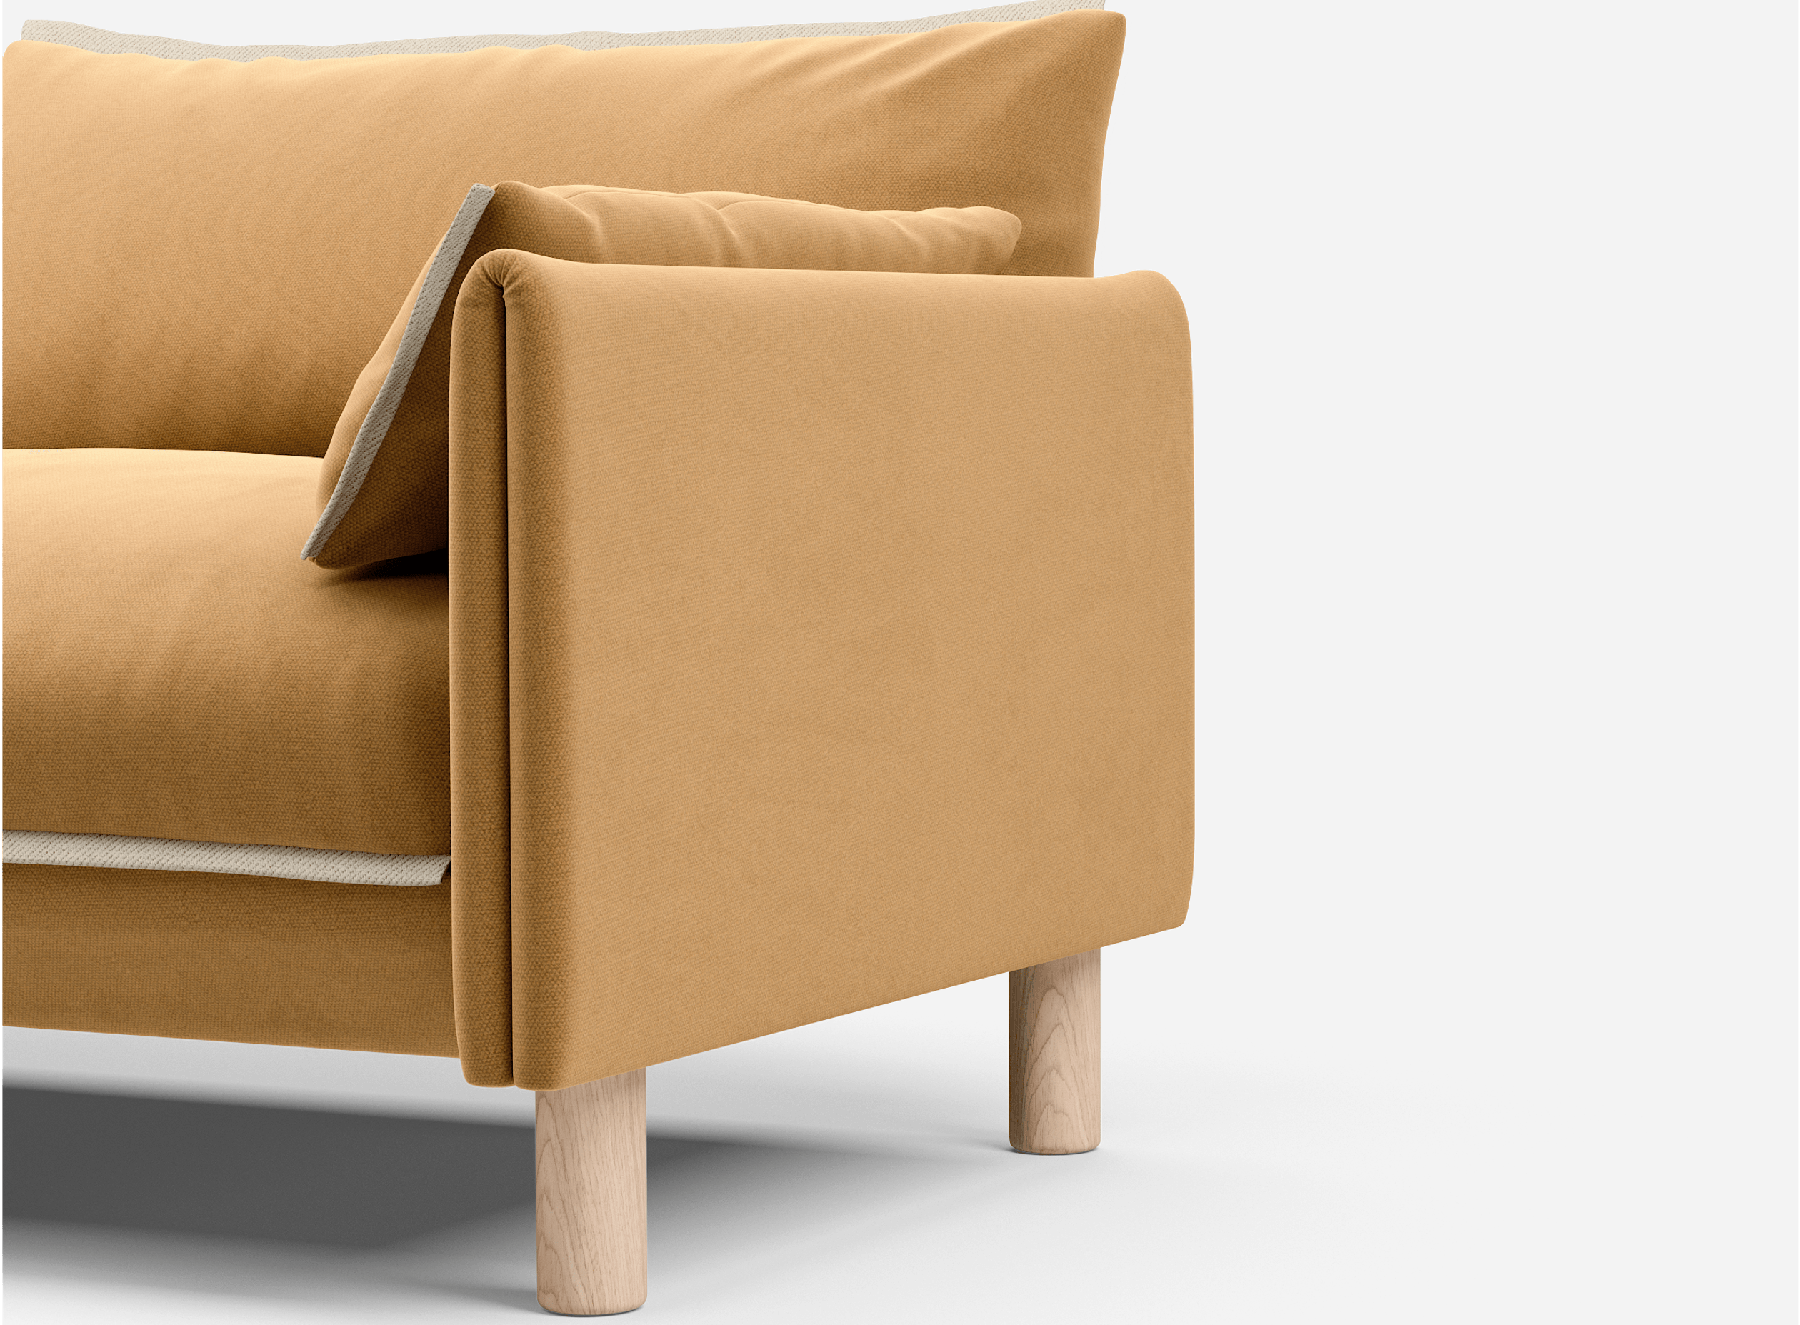 3 seater cozmo sofa cotton Ochre with cotton Ochre jacket front 1/3 angled view @ Ochre Cotton Jacket | Natural Trim